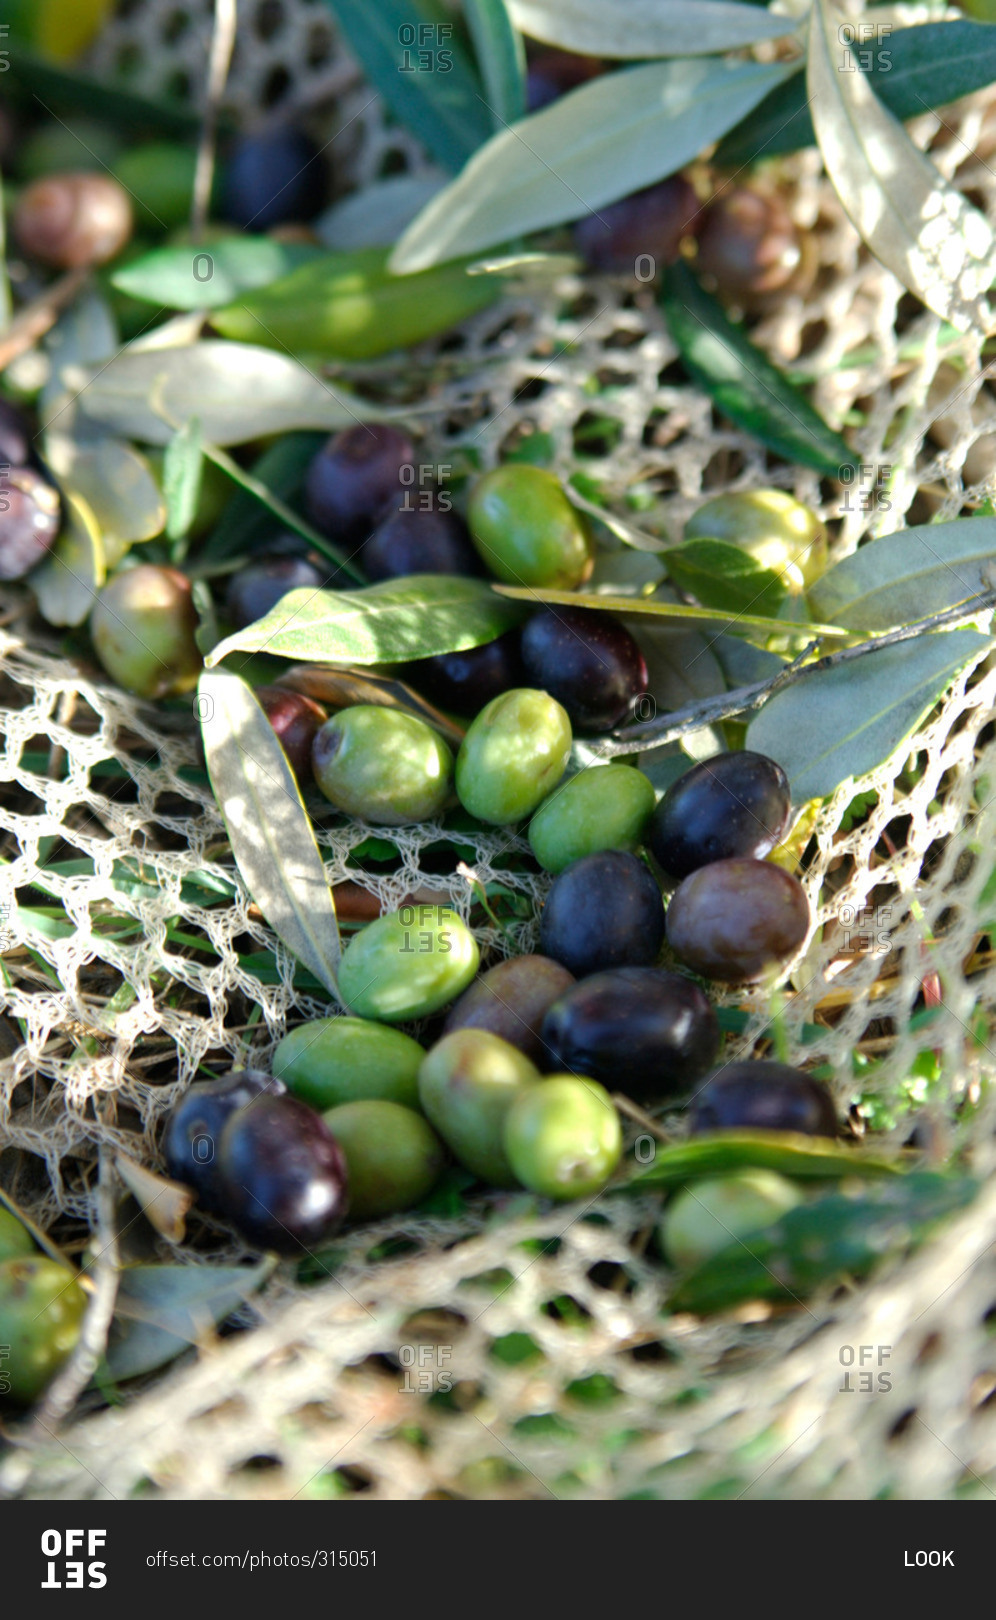 Olives in a net, Umbria, Italy